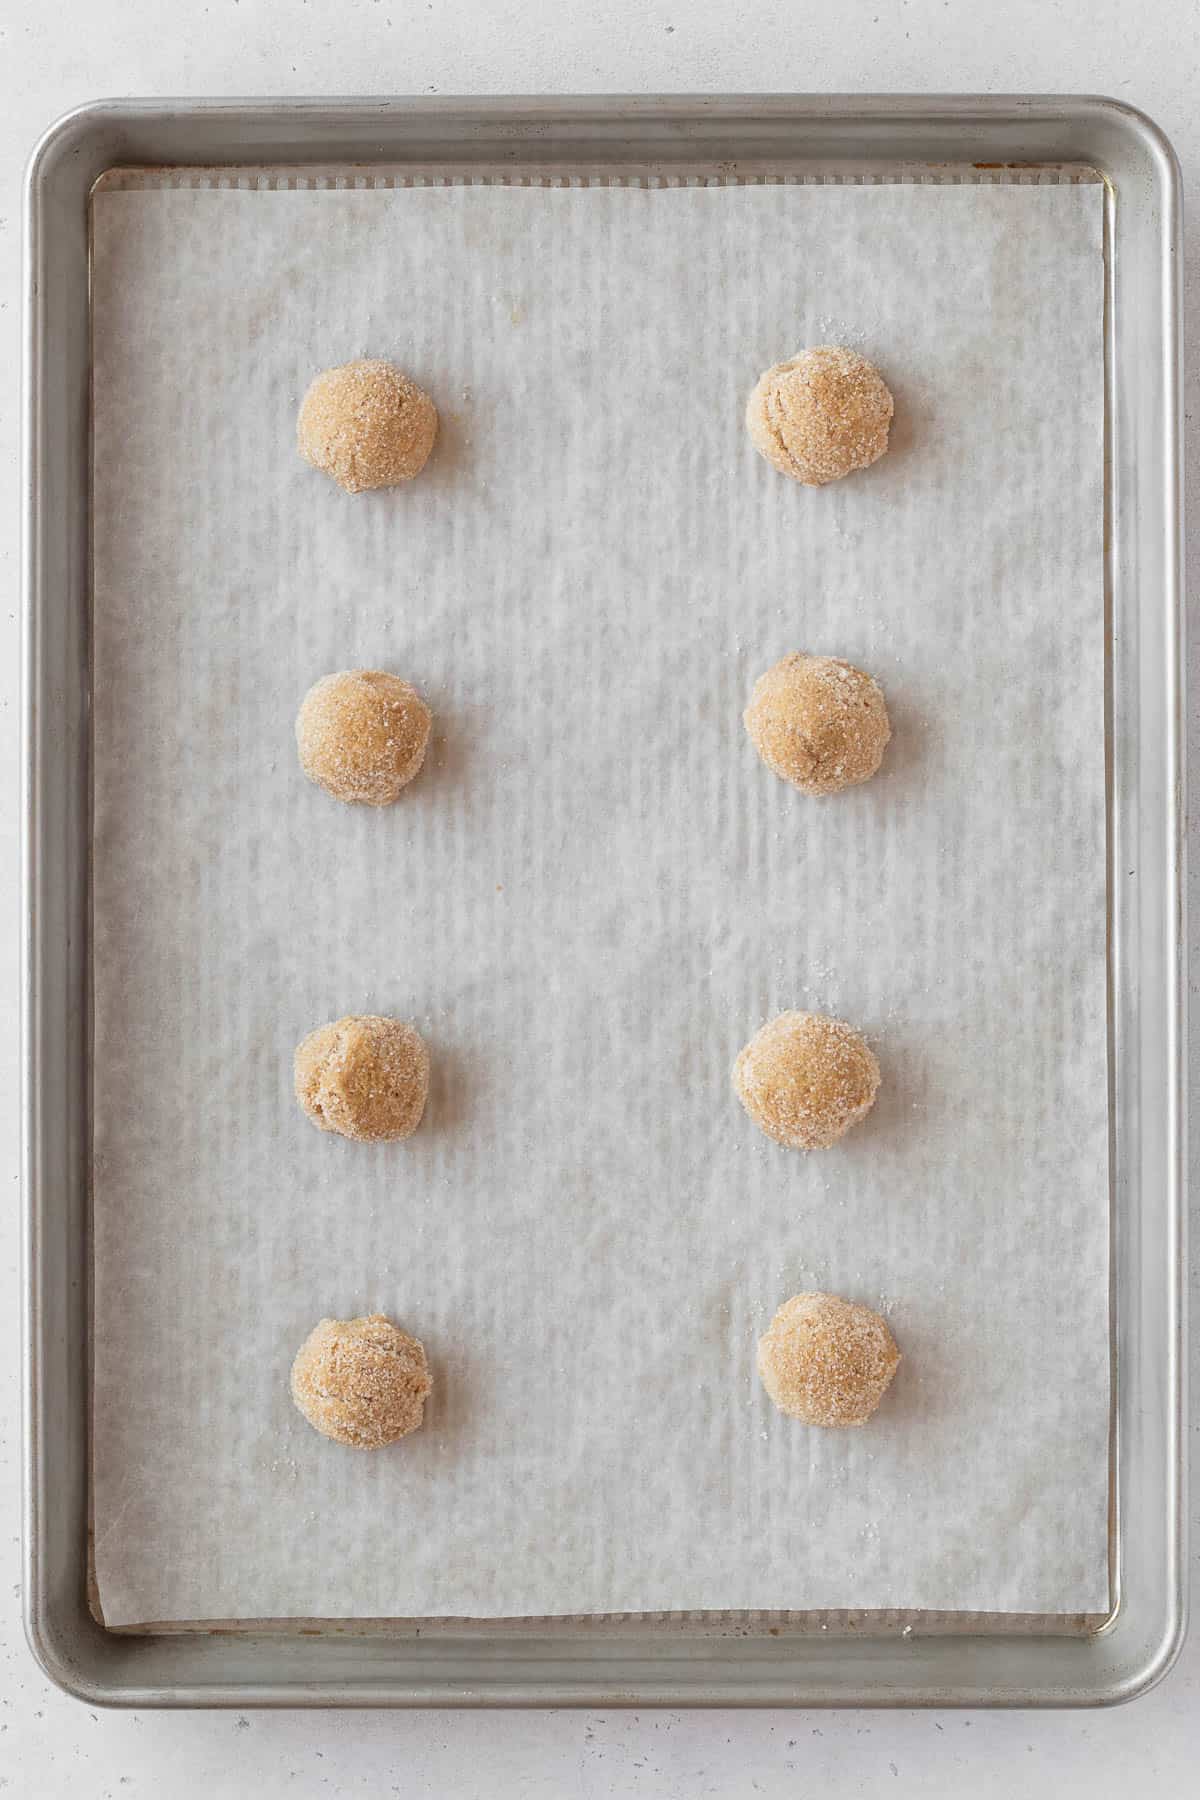 Cookie dough rolled into sugar and placed on a baking sheet.